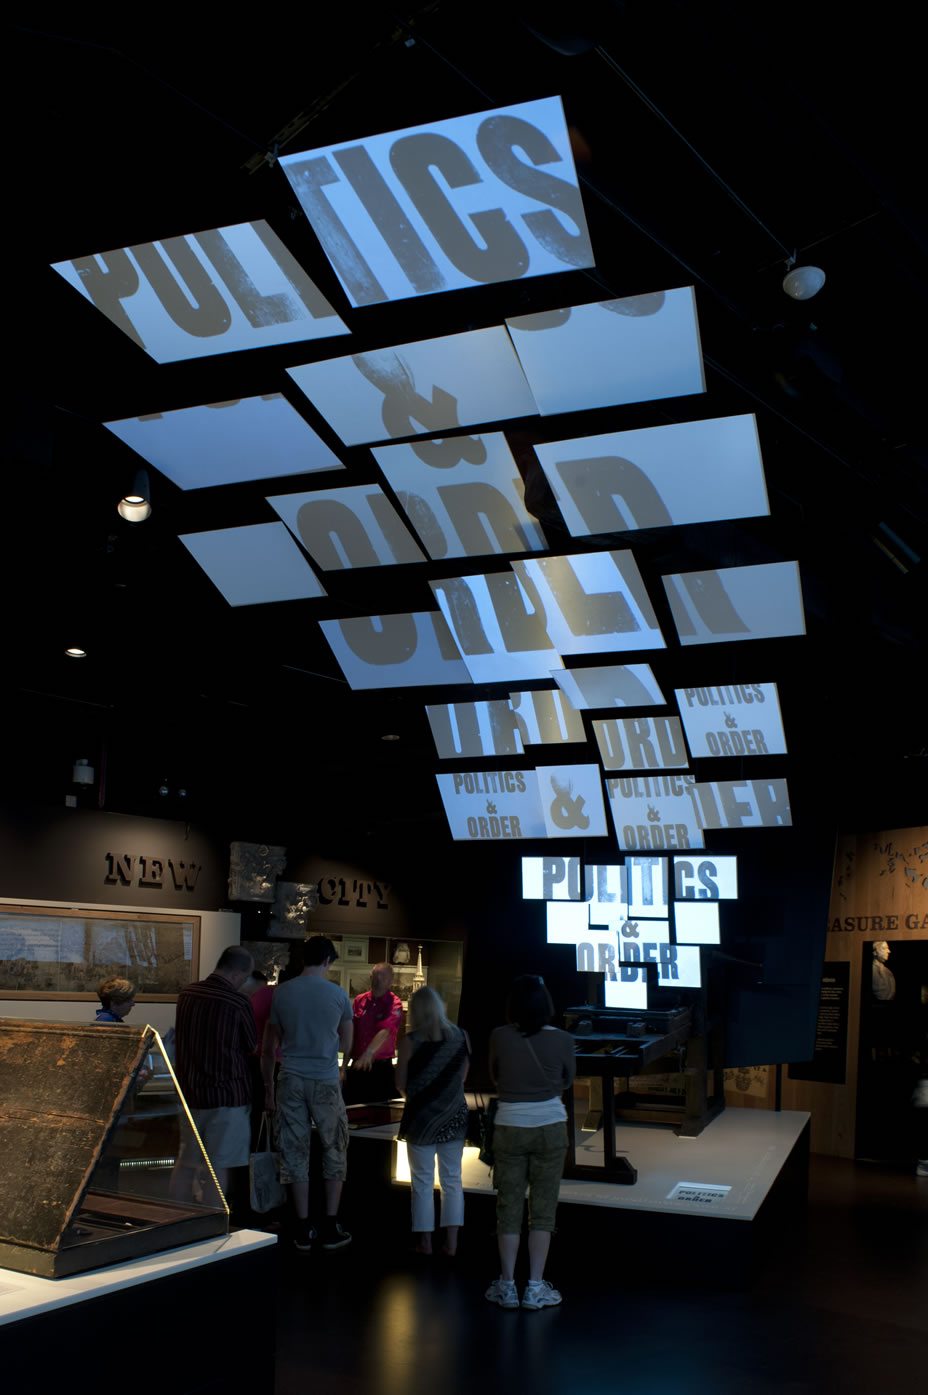 Museum of London Expanding City